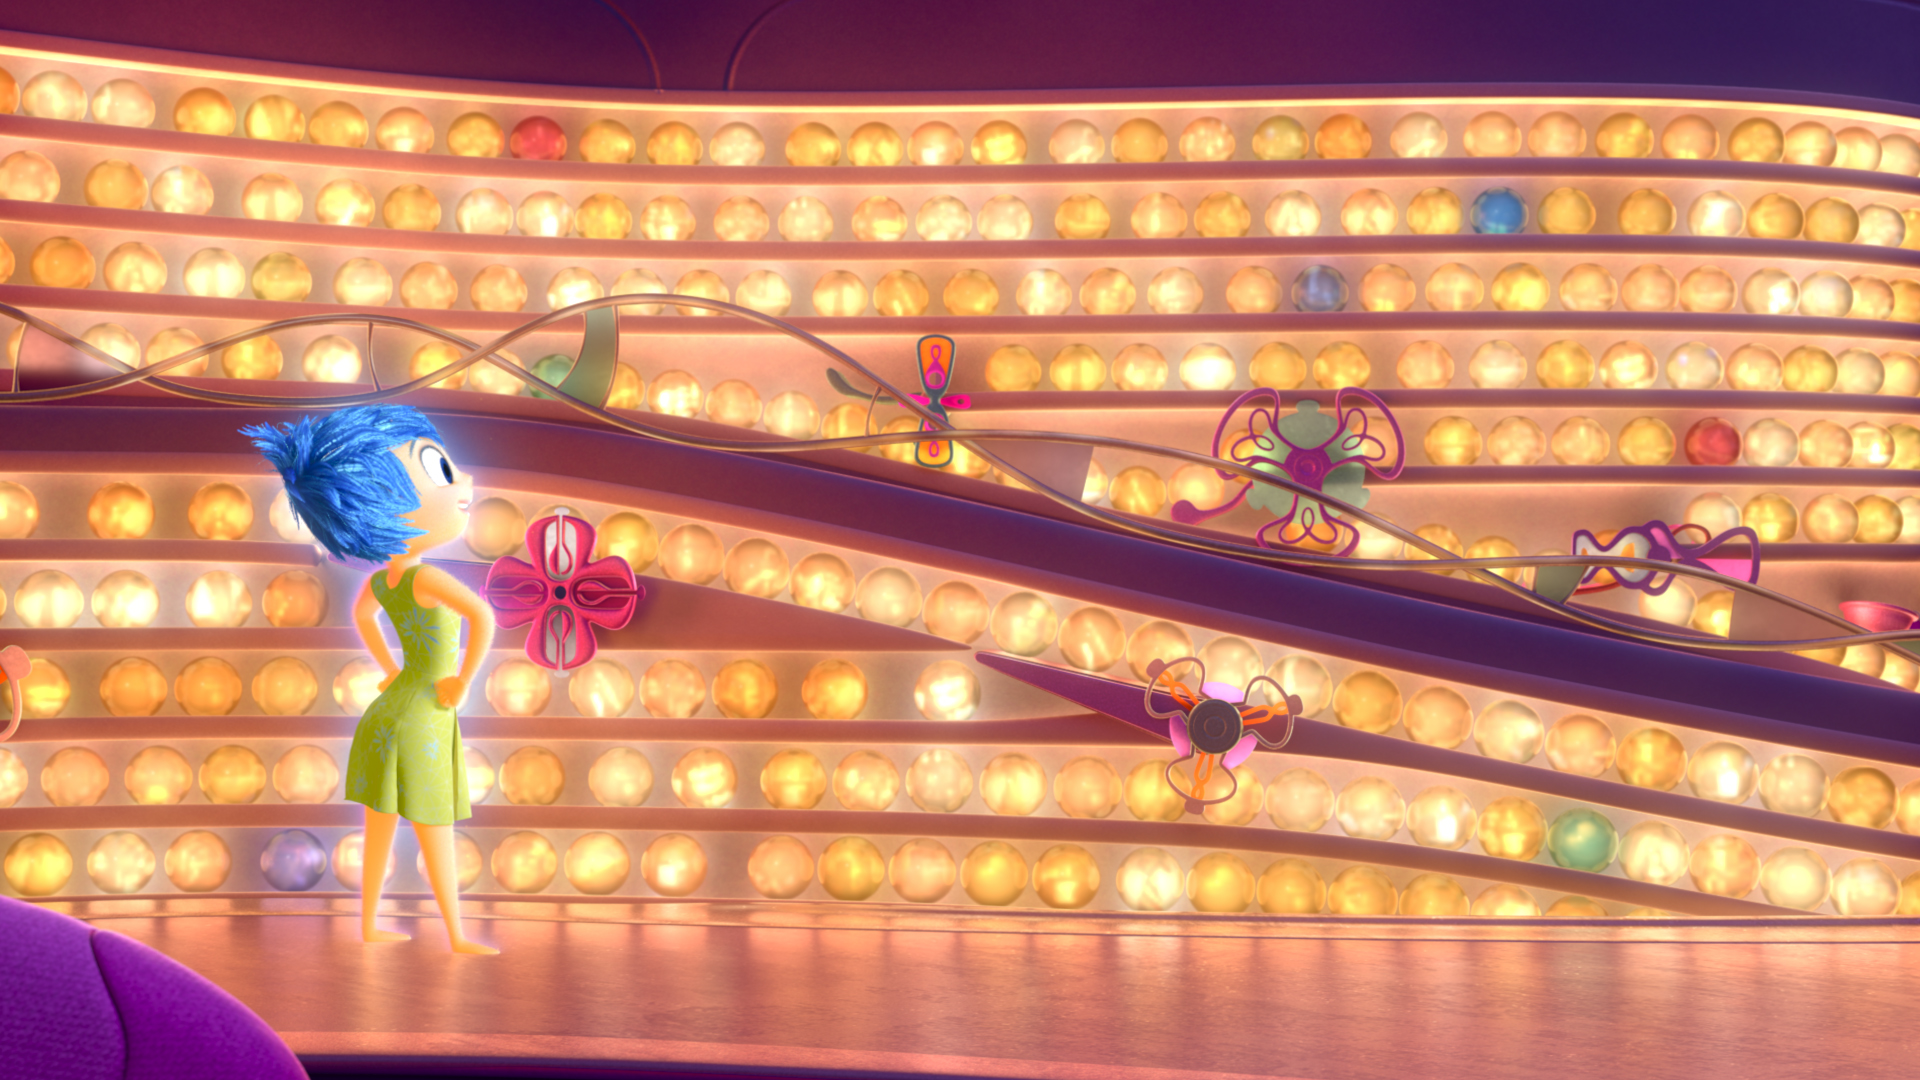 Toy Story 5 & Inside Out 2 Break A Pixar Promise (But It Was